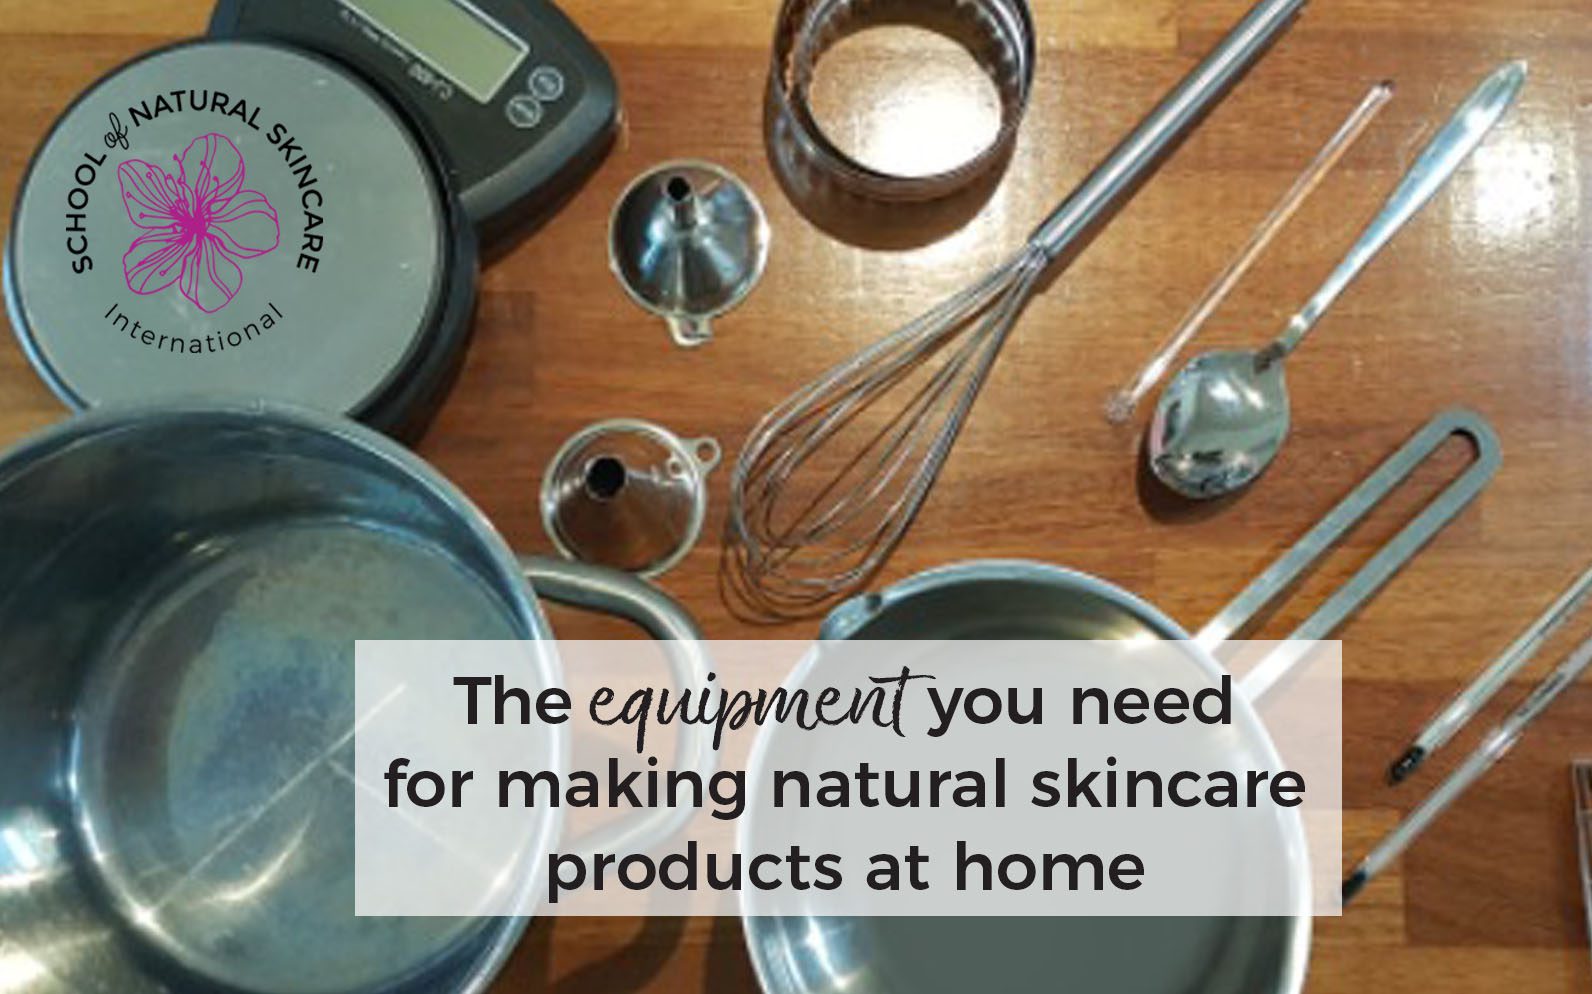 https://www.schoolofnaturalskincare.com/wp-content/uploads/2017/07/equipment-you-need-for-making-natural-skincare-at-home.jpg